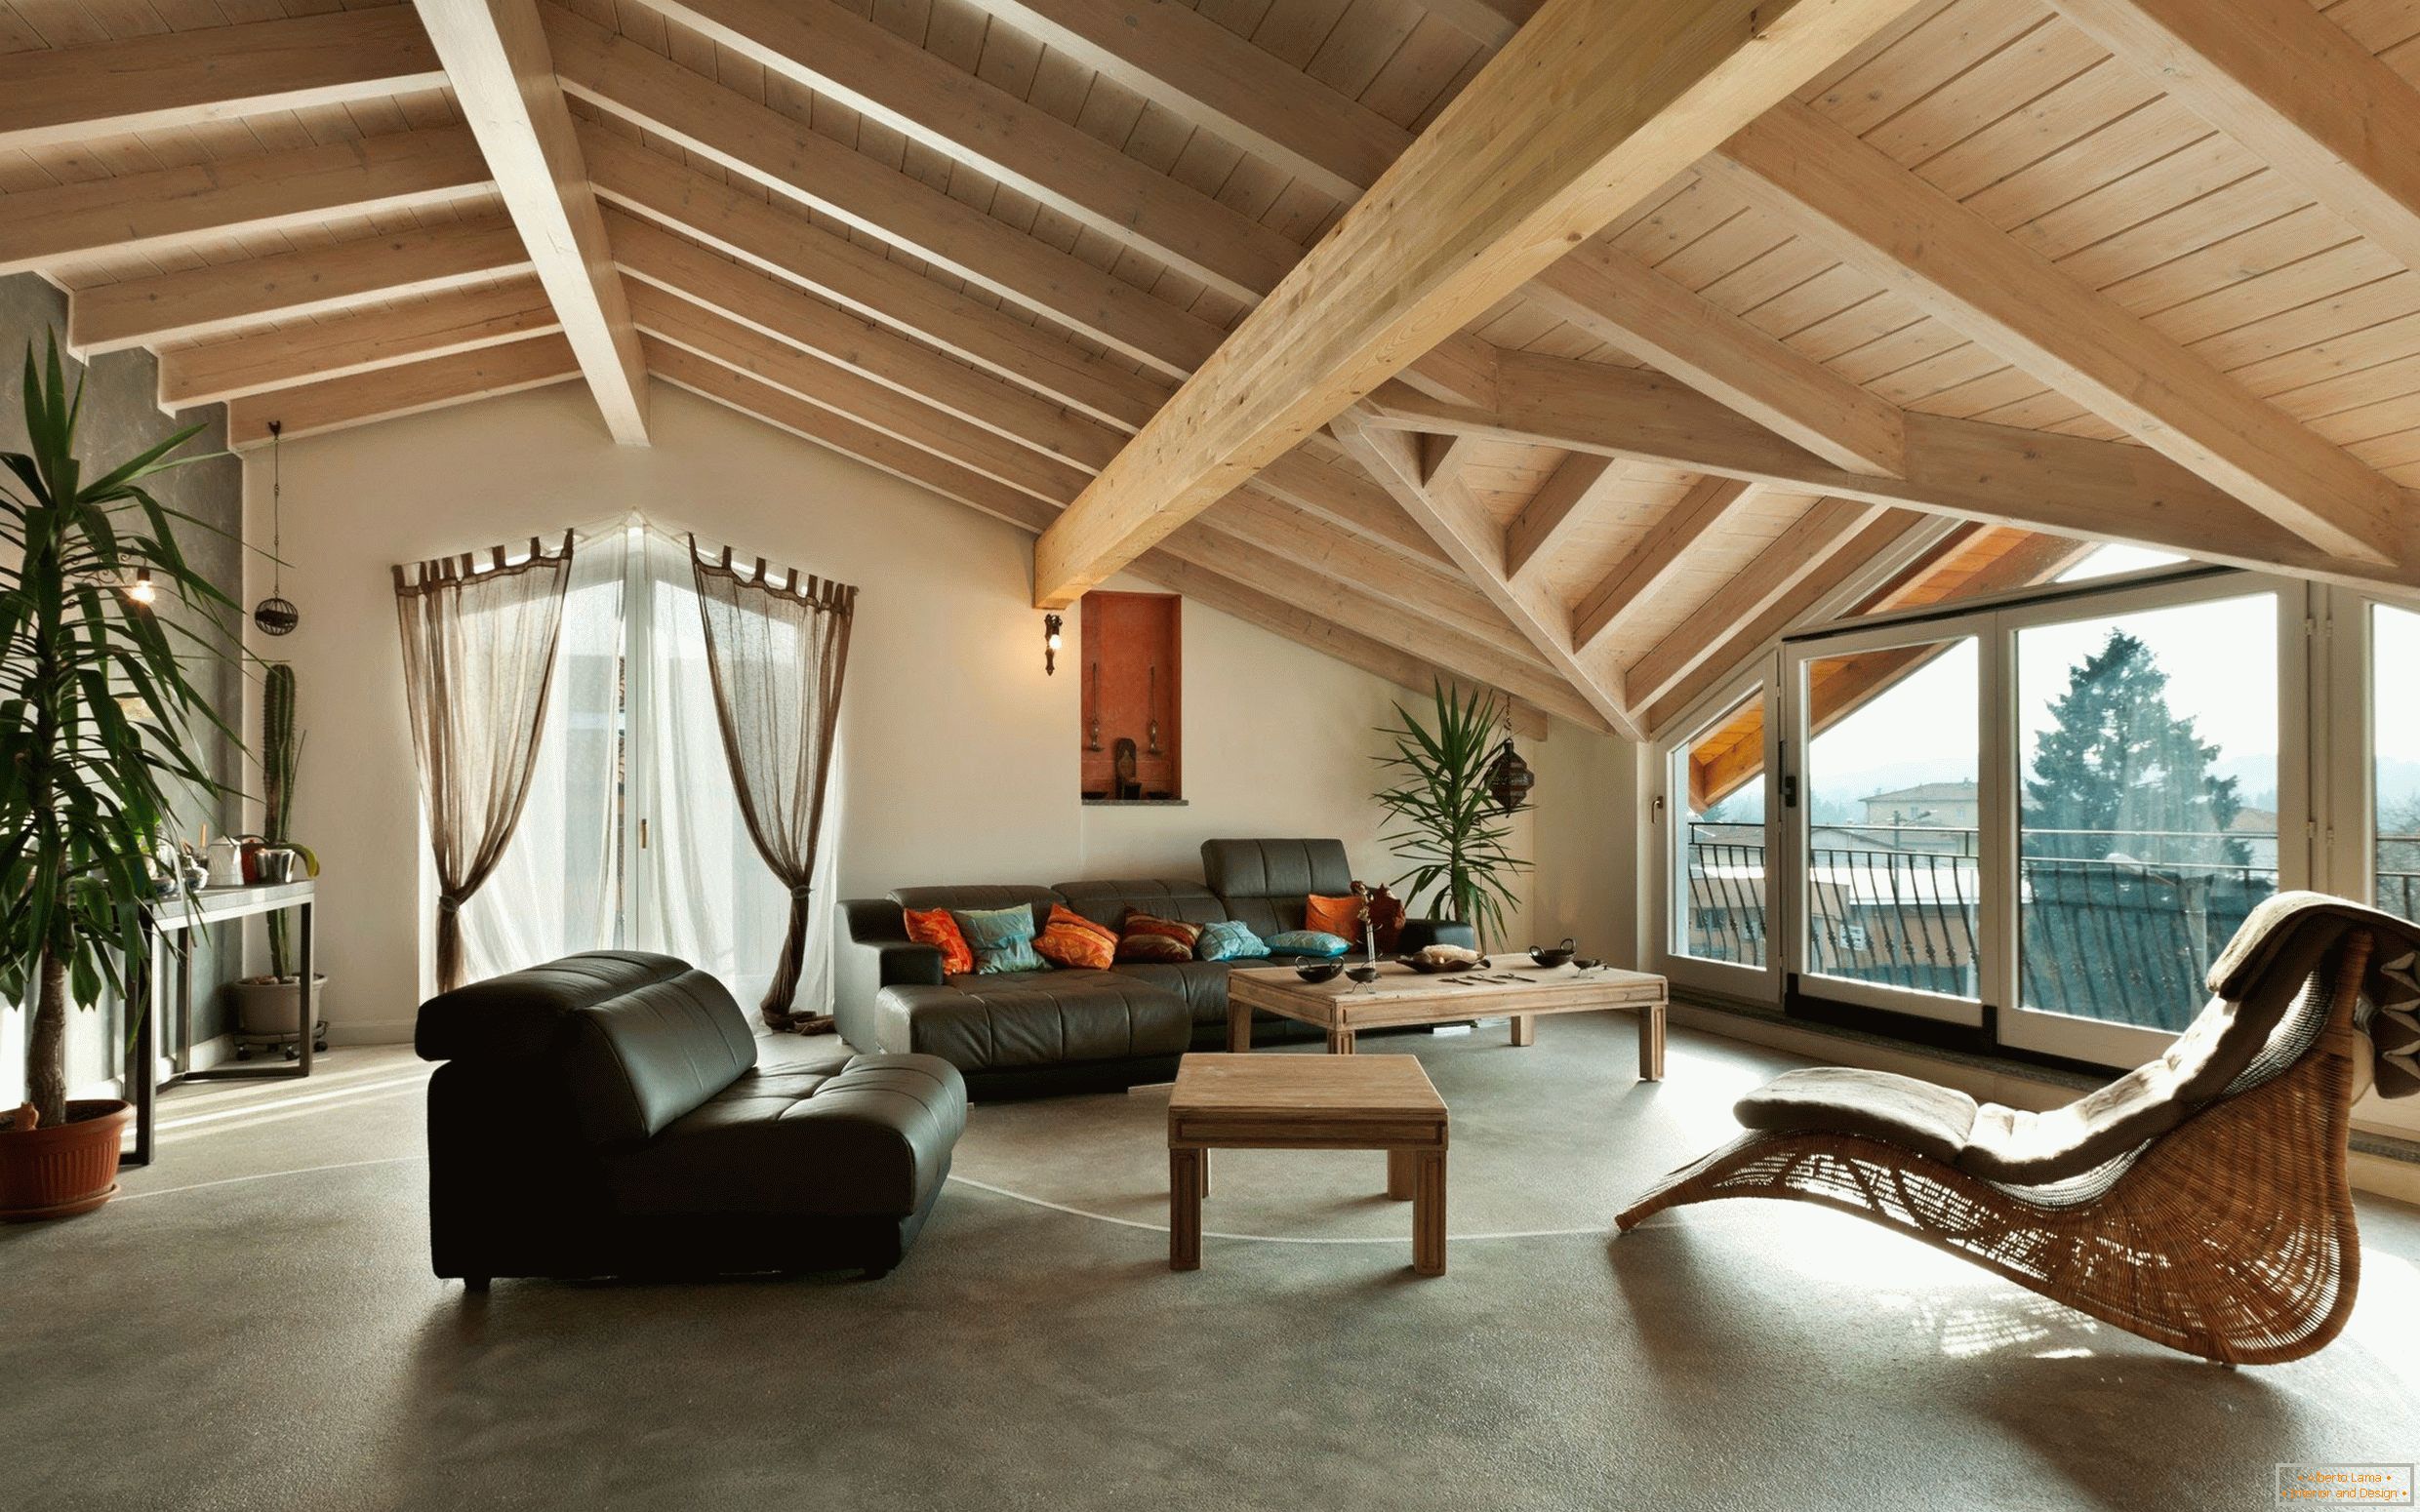 Living room in the attic